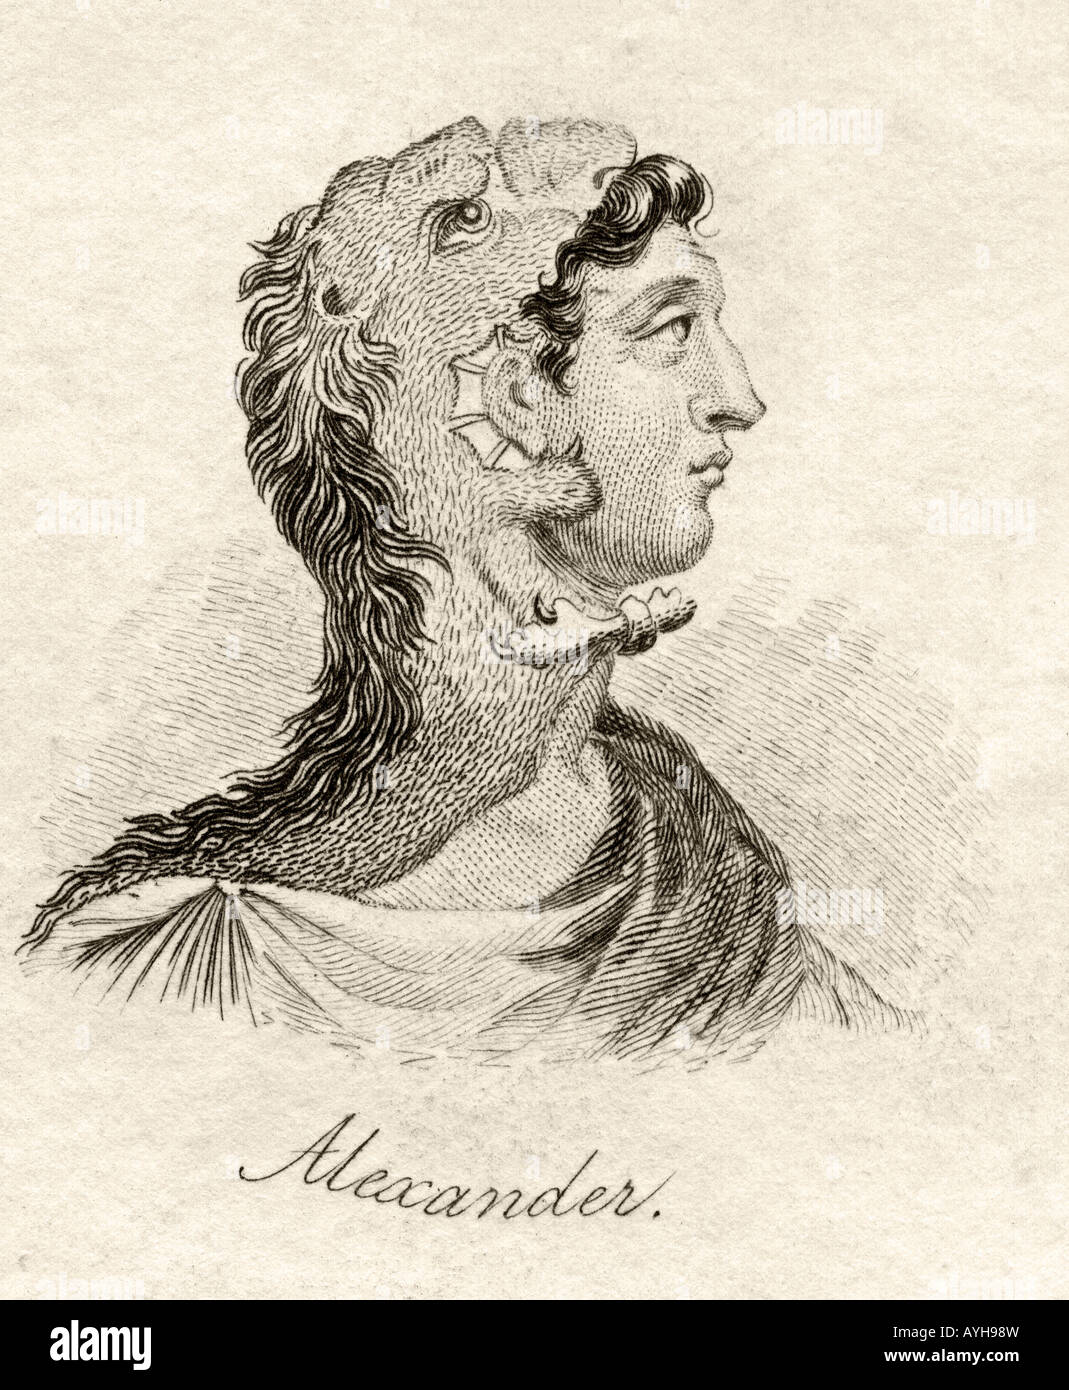 Alexander the Great, 356BC - 323BC. Ancient Greek King of Macedonia. From the book Crabb's Historical Dictionary, published 1825. Stock Photo